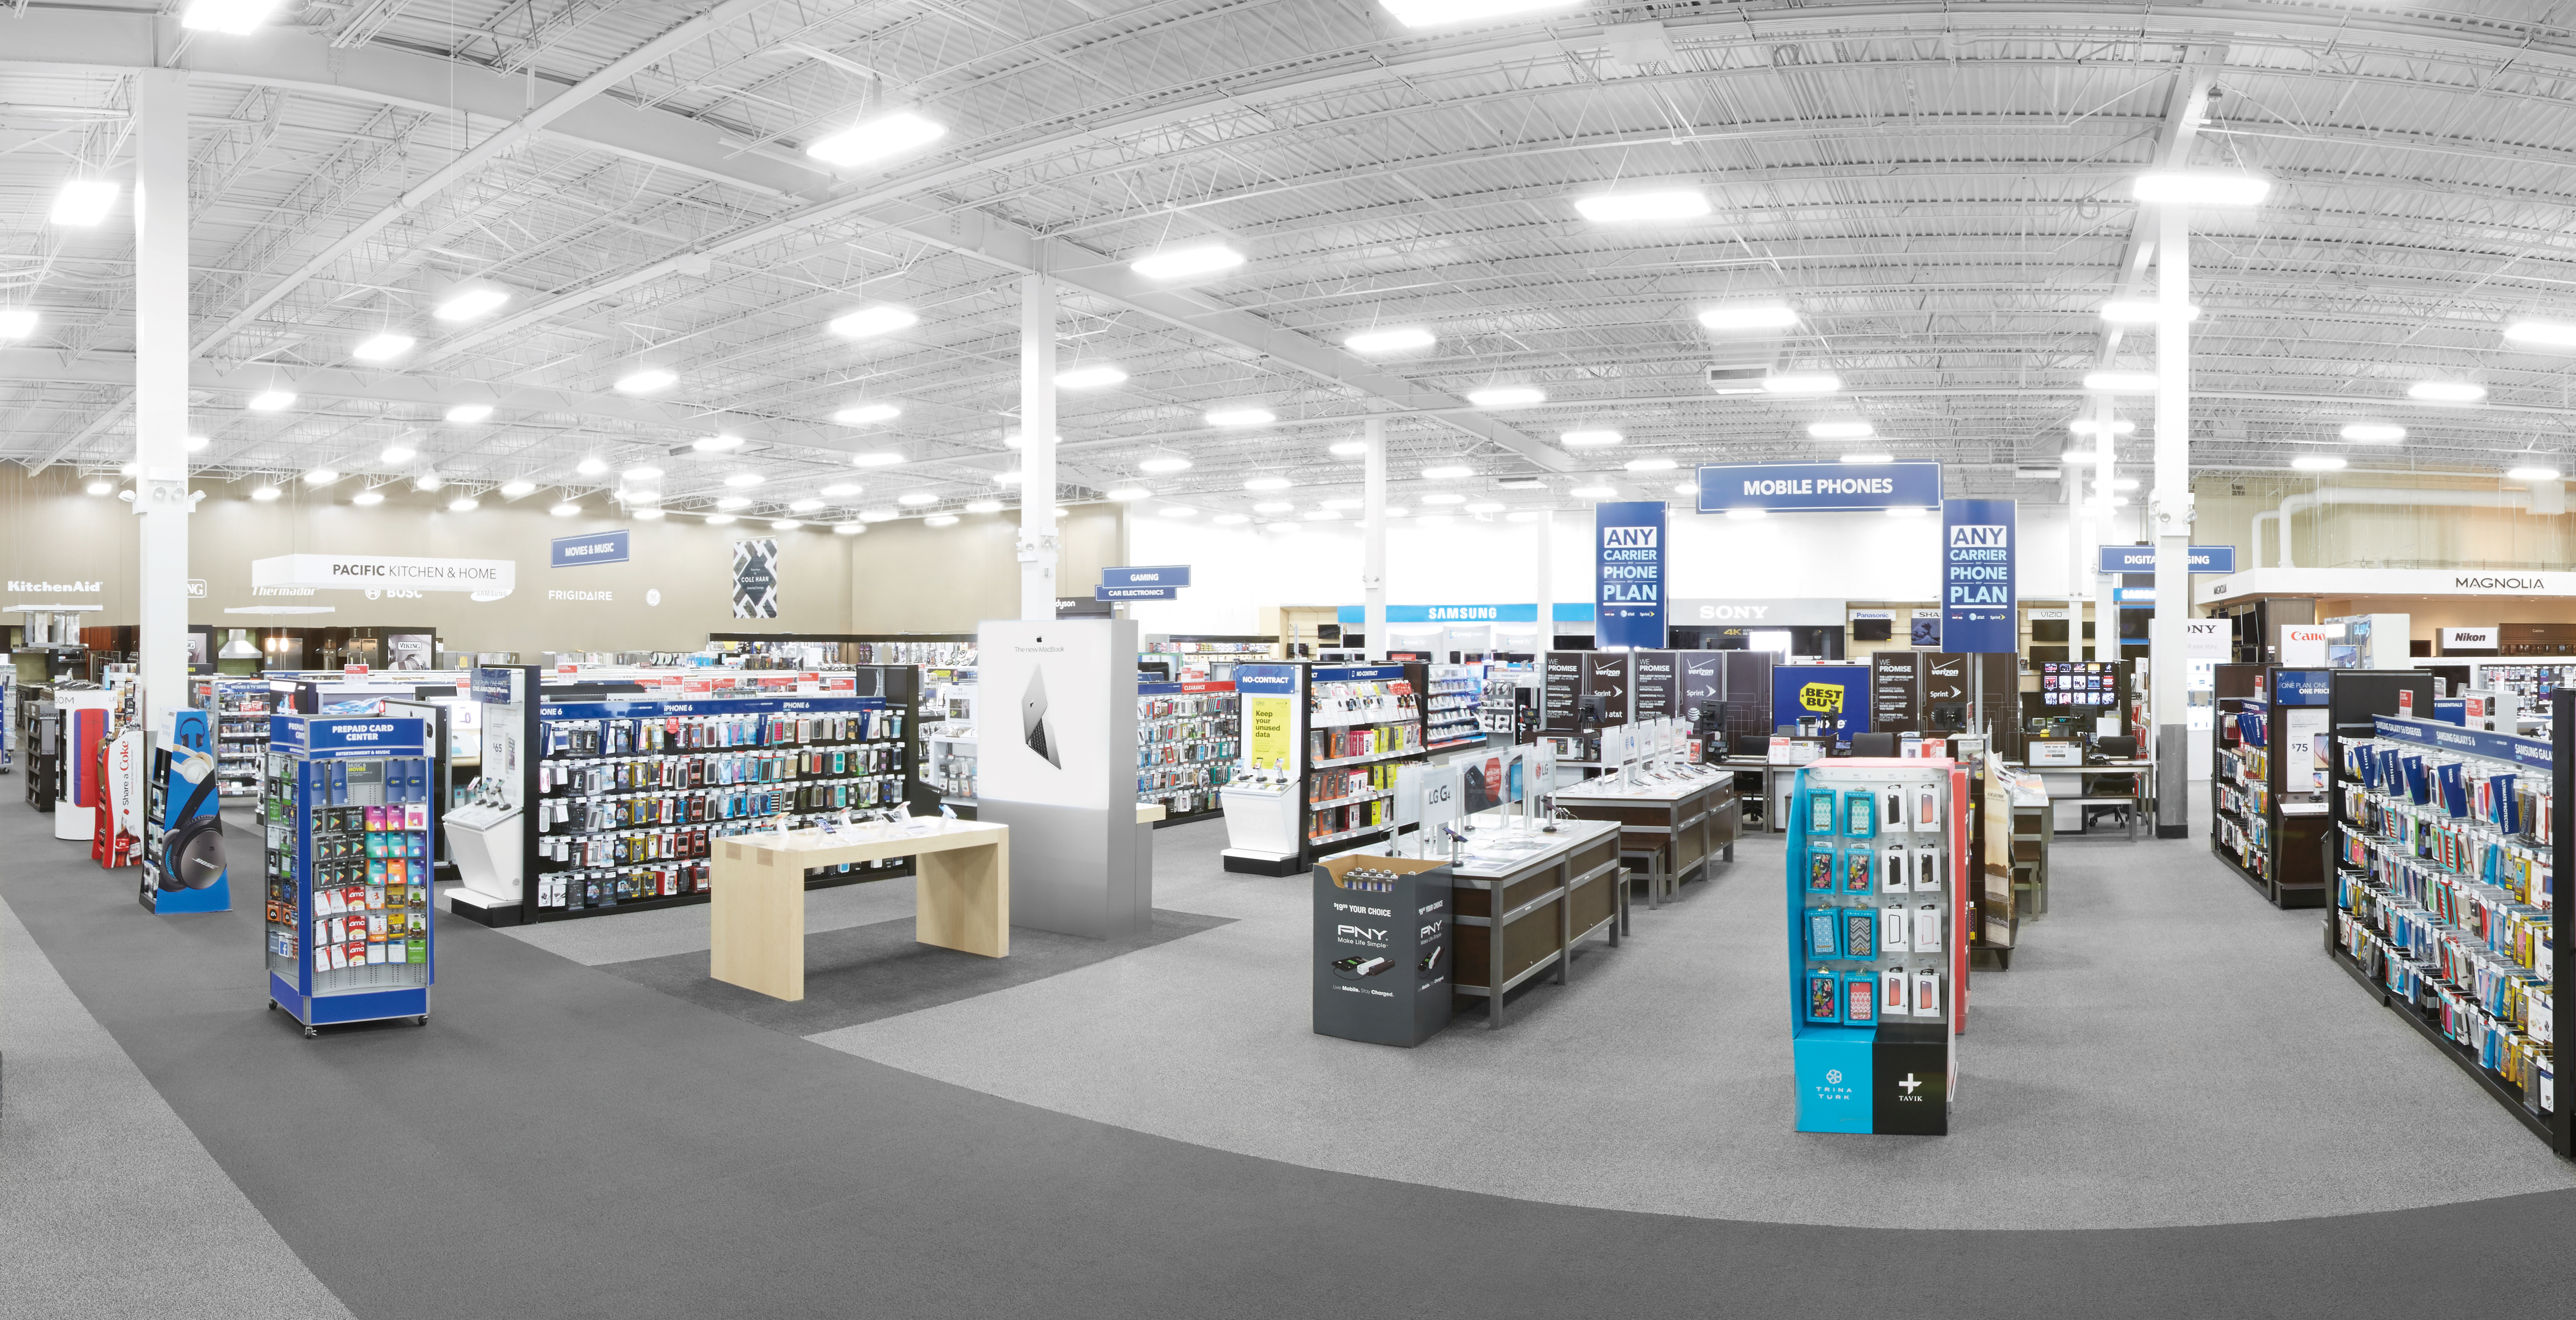 Best Buy Accelerates Efforts to Combat Climate Change